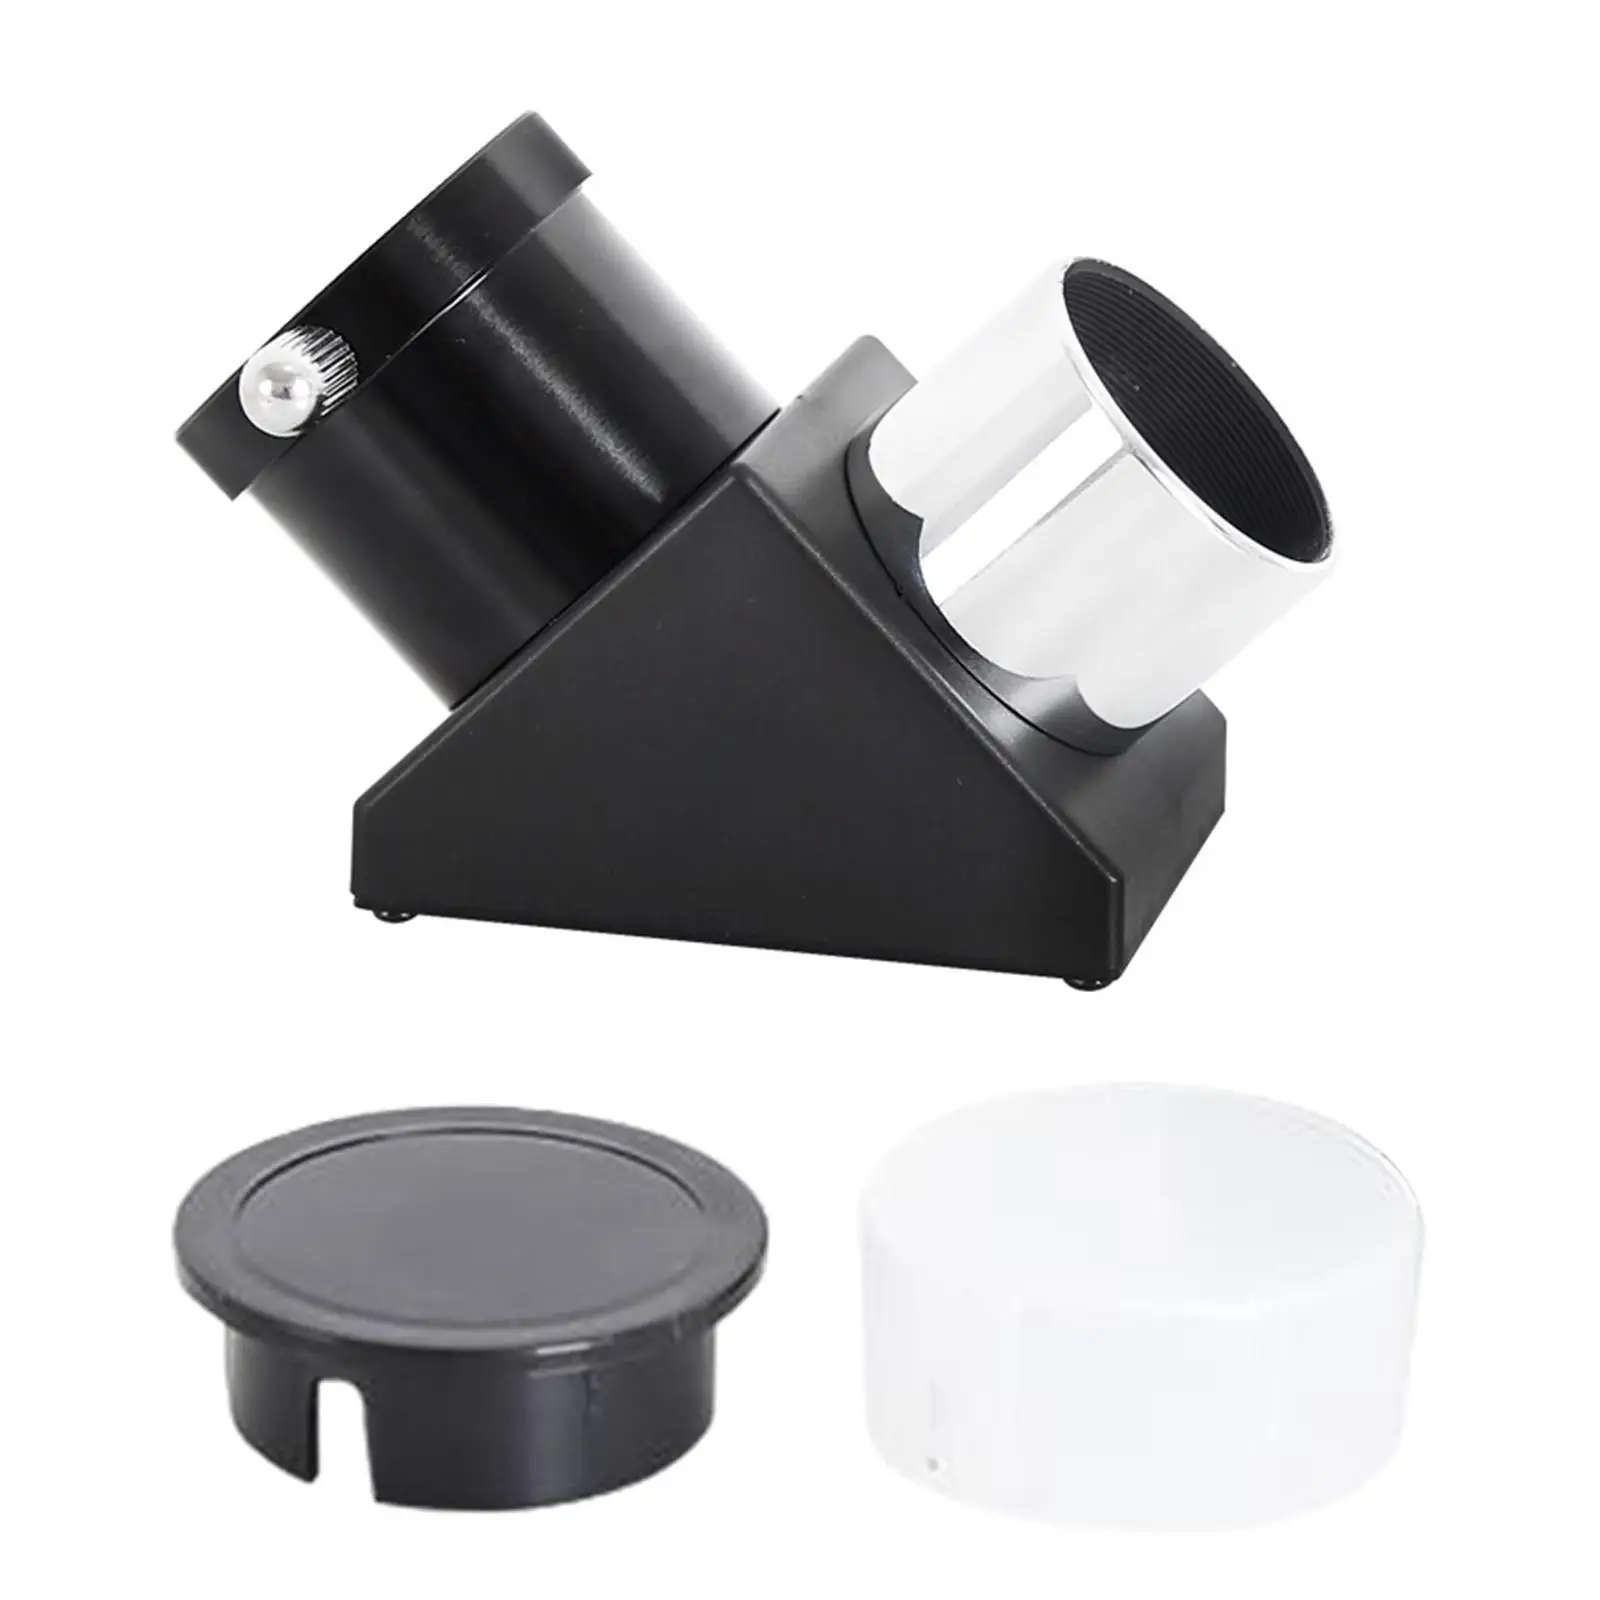 Zeniths Mirror Astronomical Telescope Accessories for Astronomical Visual Astrophotography Universal Replacement Easy to Install